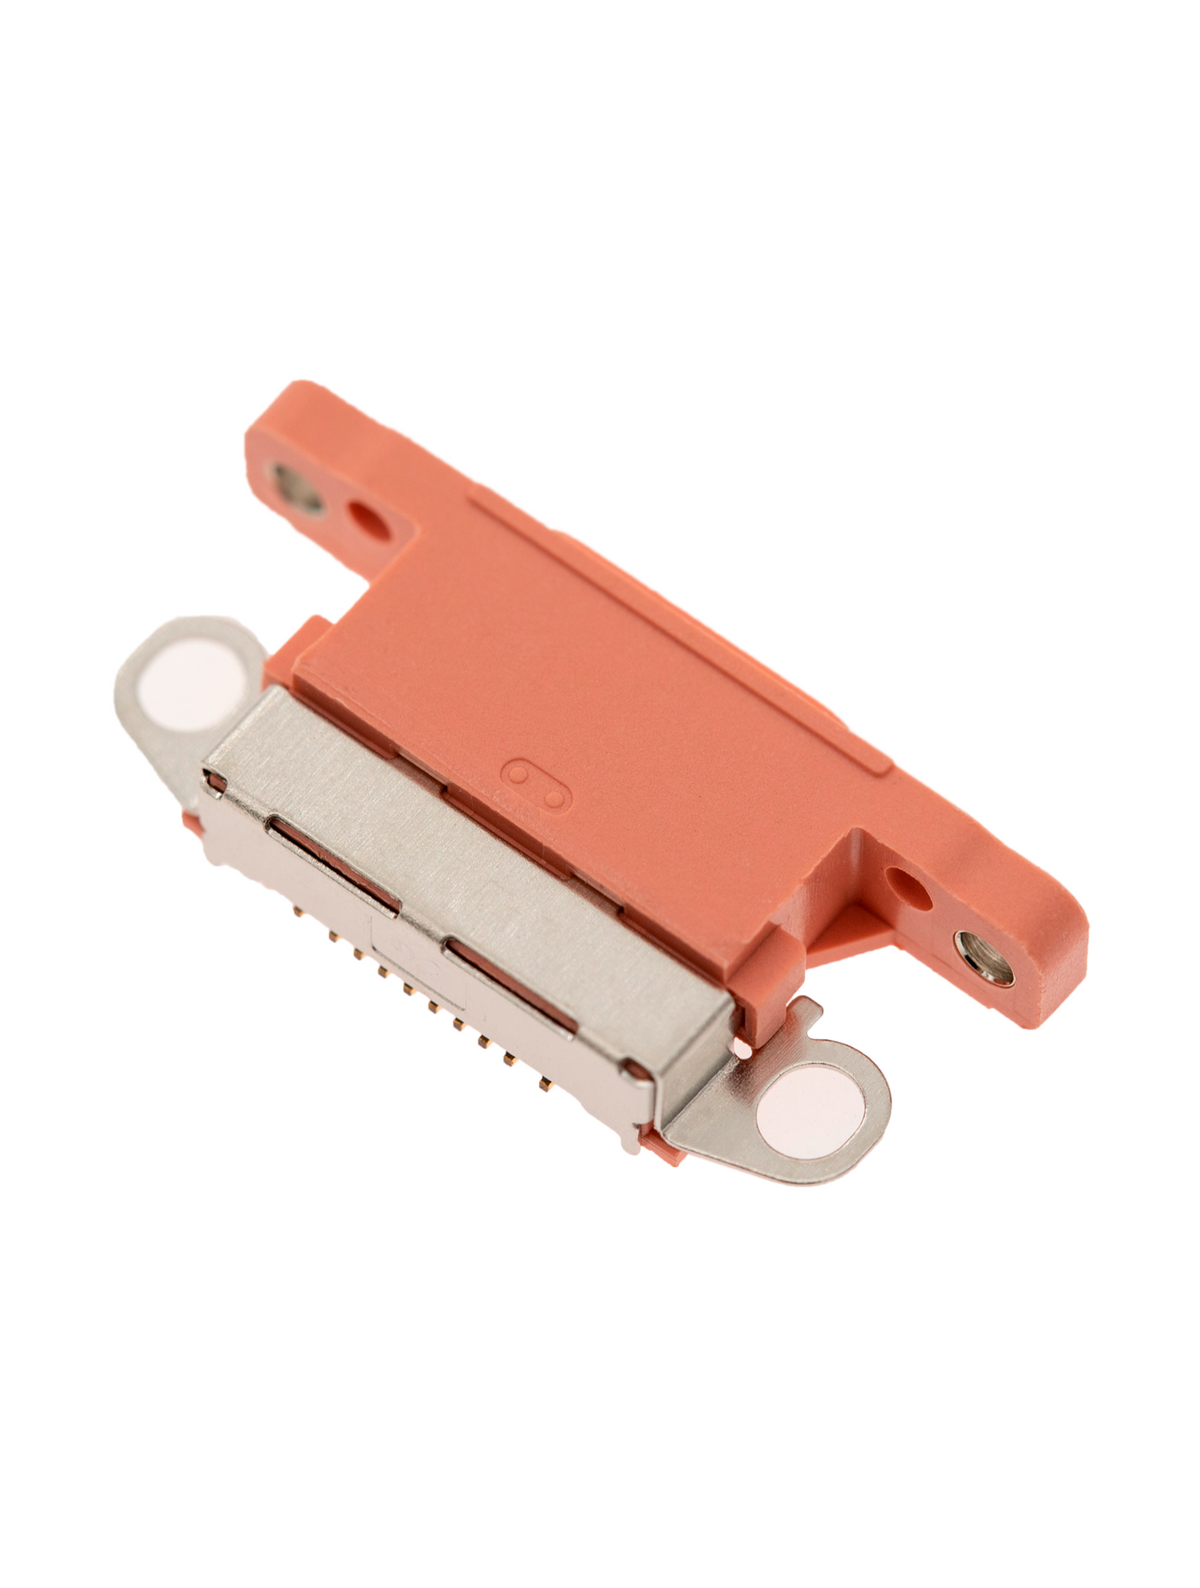 CORAL CHARGING PORT ONLY (10 PACK) COMPATIBLE FOR IPHONE XR